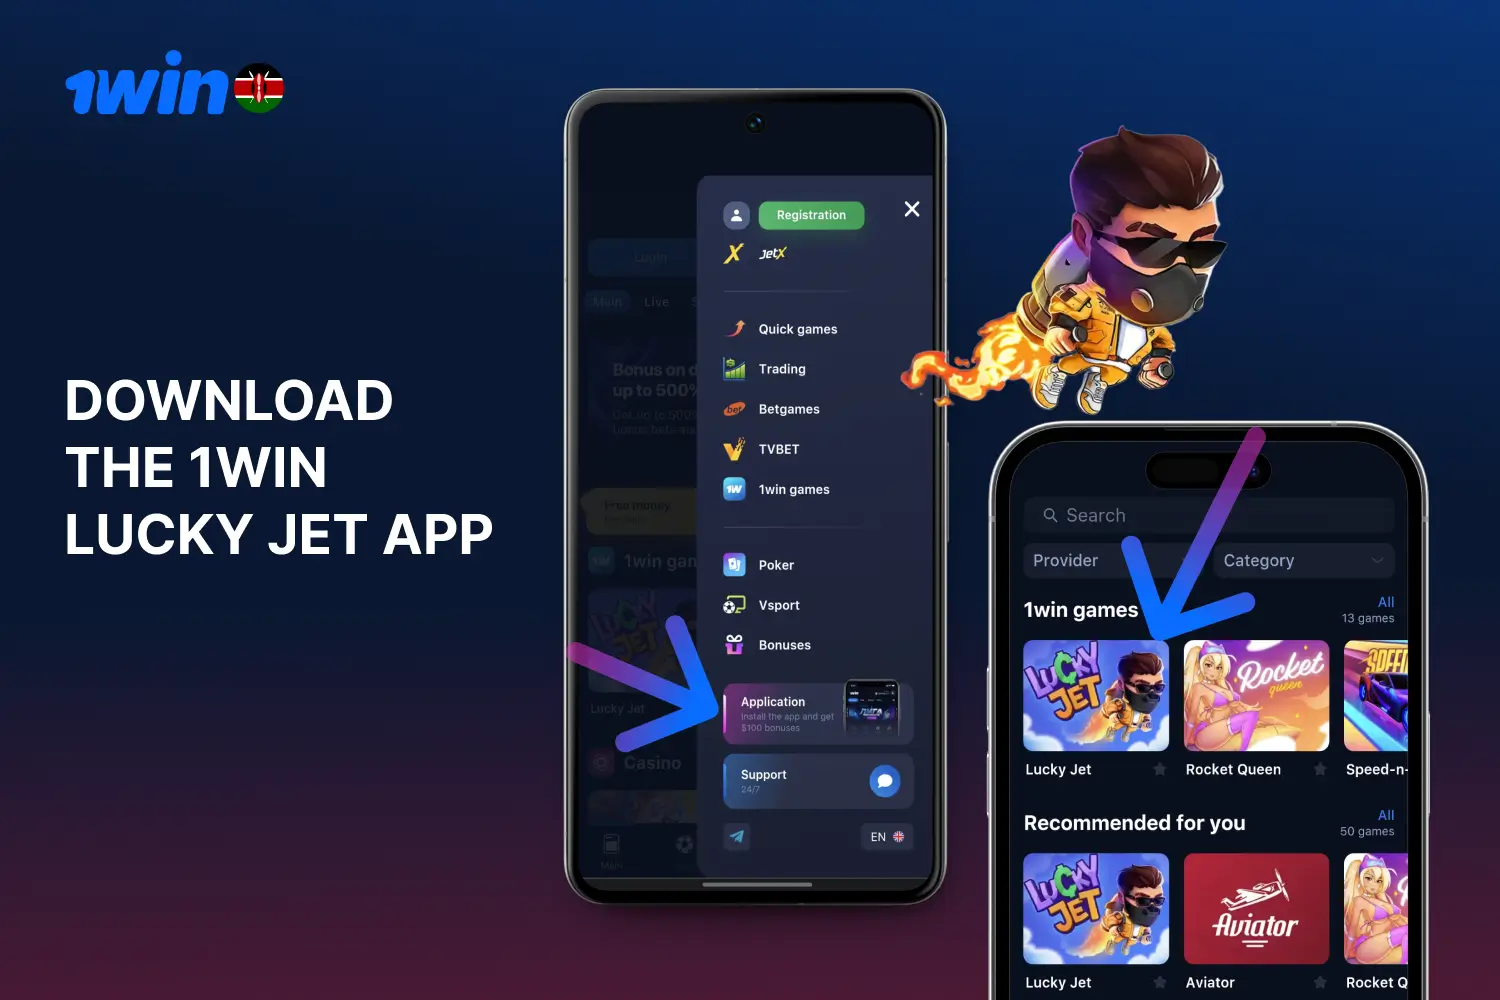 Players in Kenya can download the 1win mobile app to play Lucky Jet